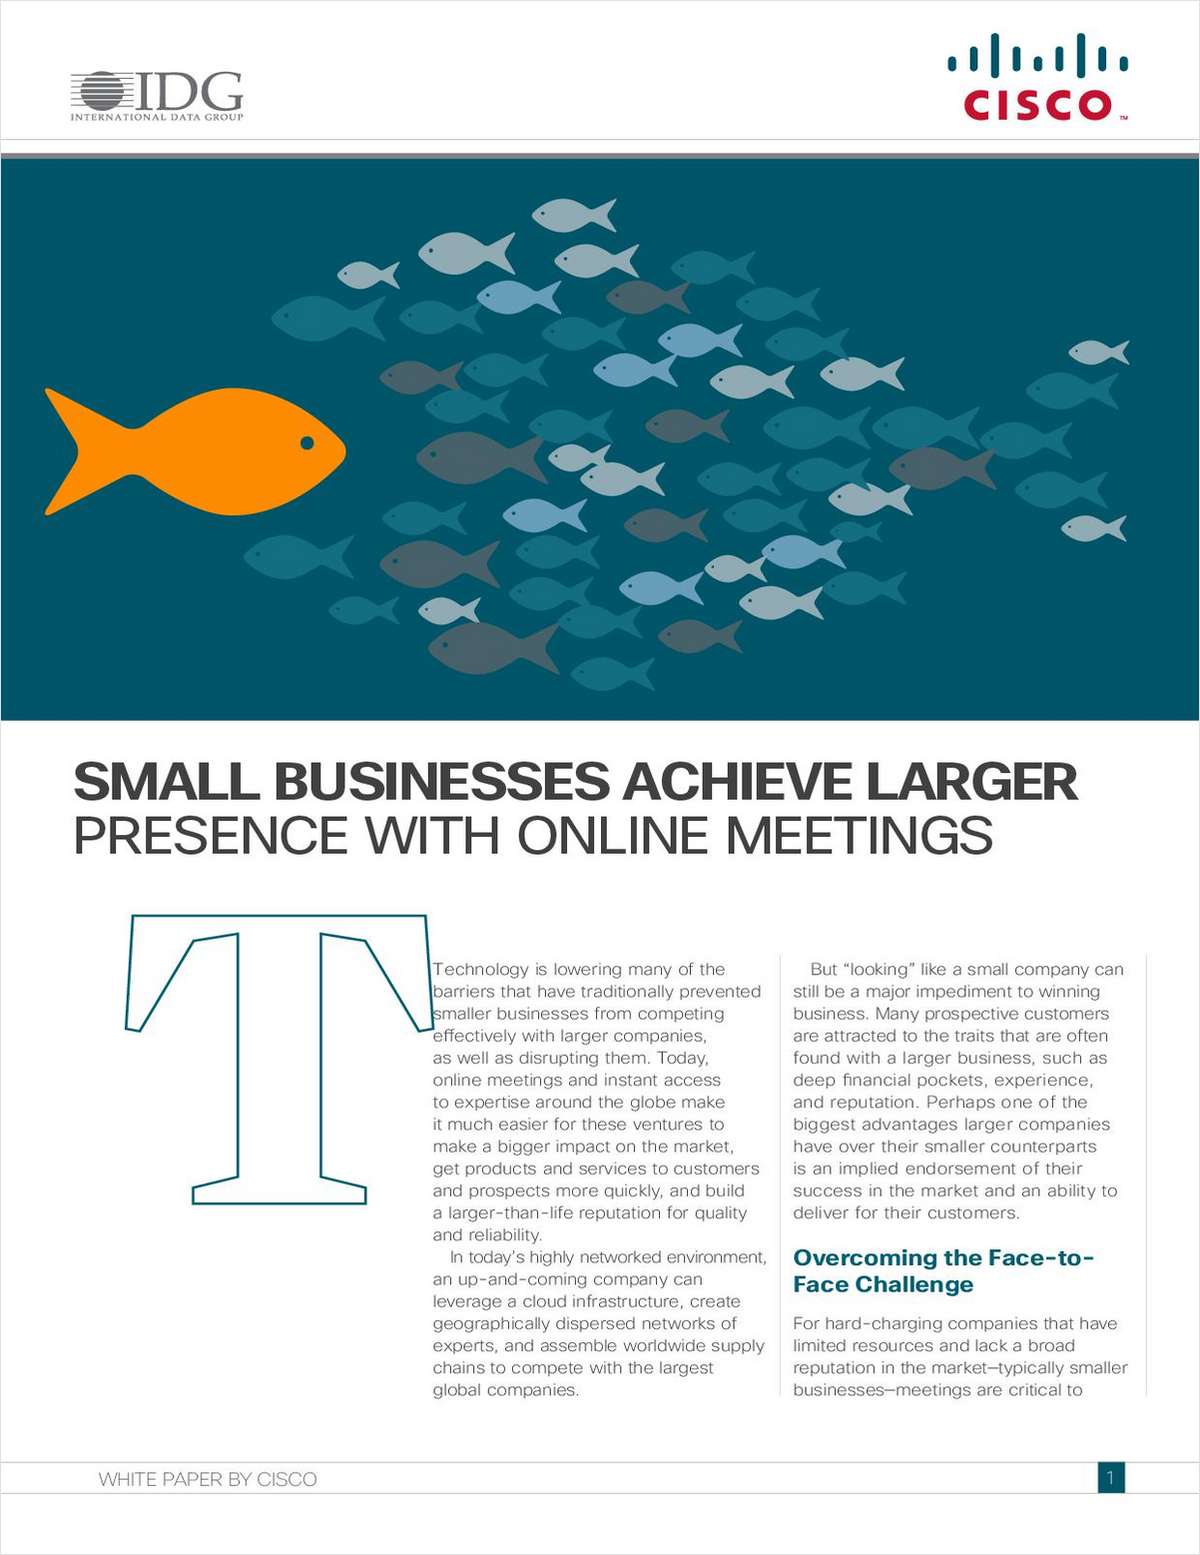 How Small Businesses Achieve Larger Presence with Online Meetings